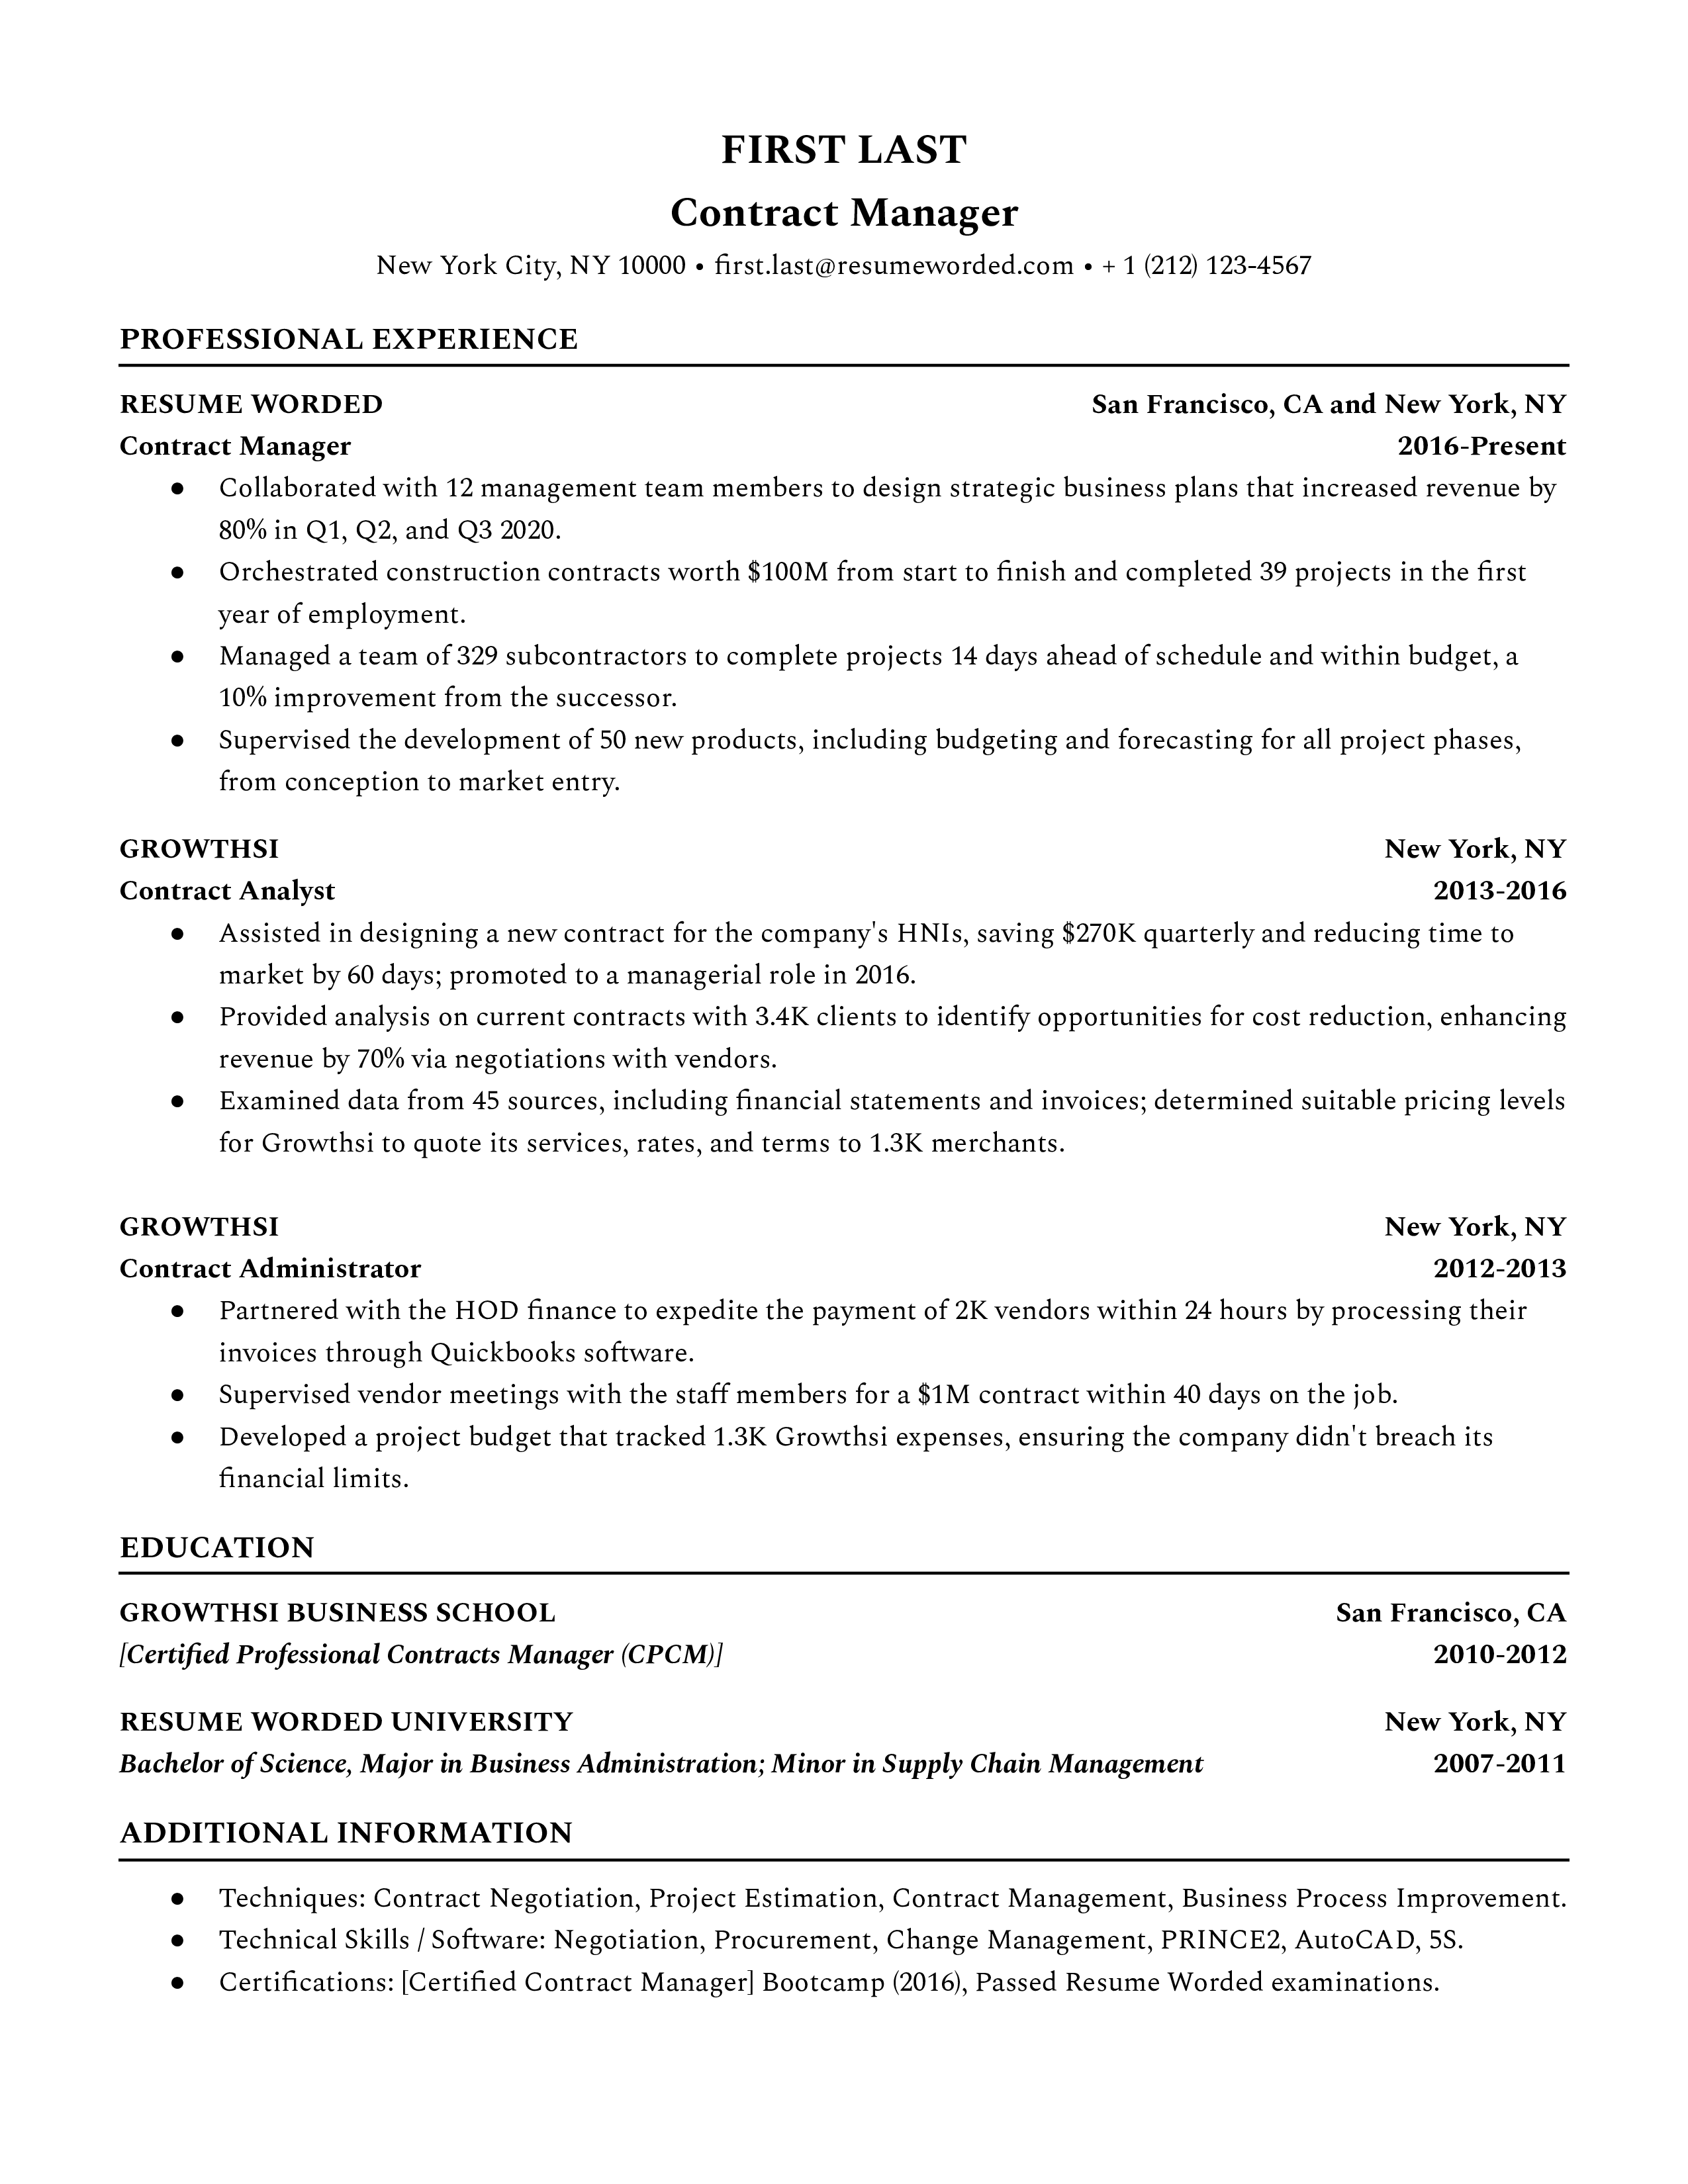 Contract Manager Resume Sample